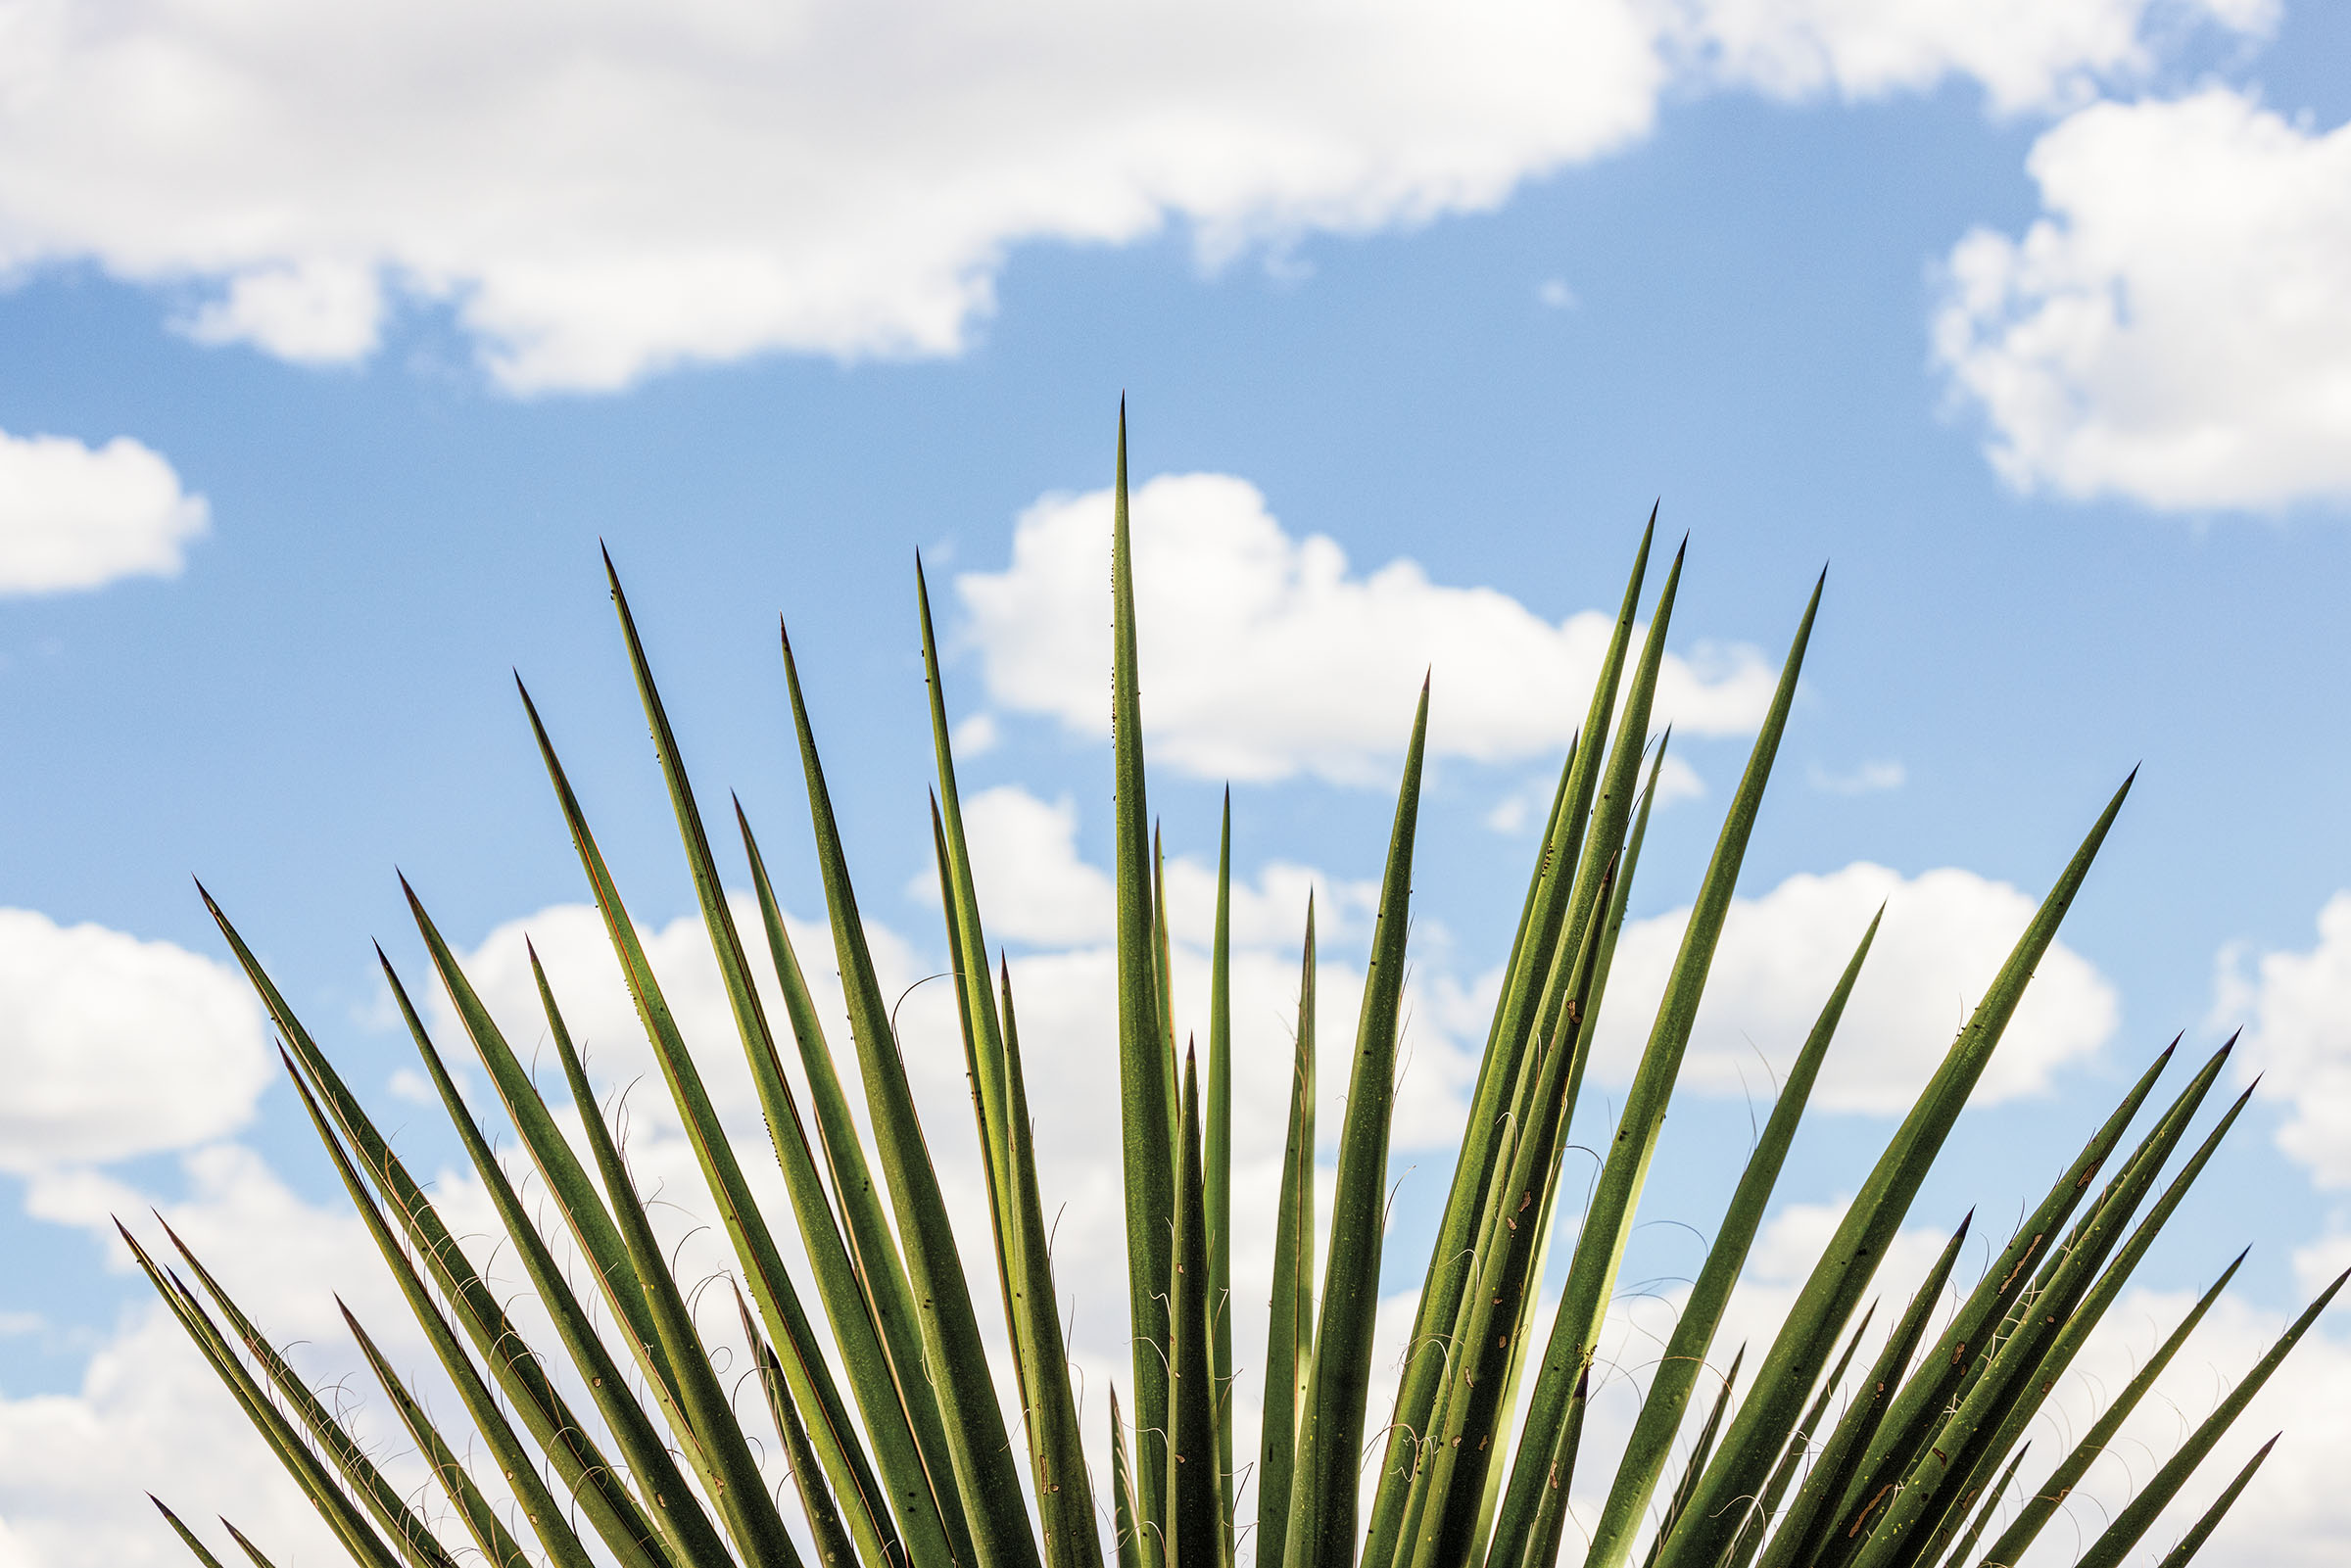 Spiky green leaves of a Yucca cactus against a backdrop of blue skies with white clouds